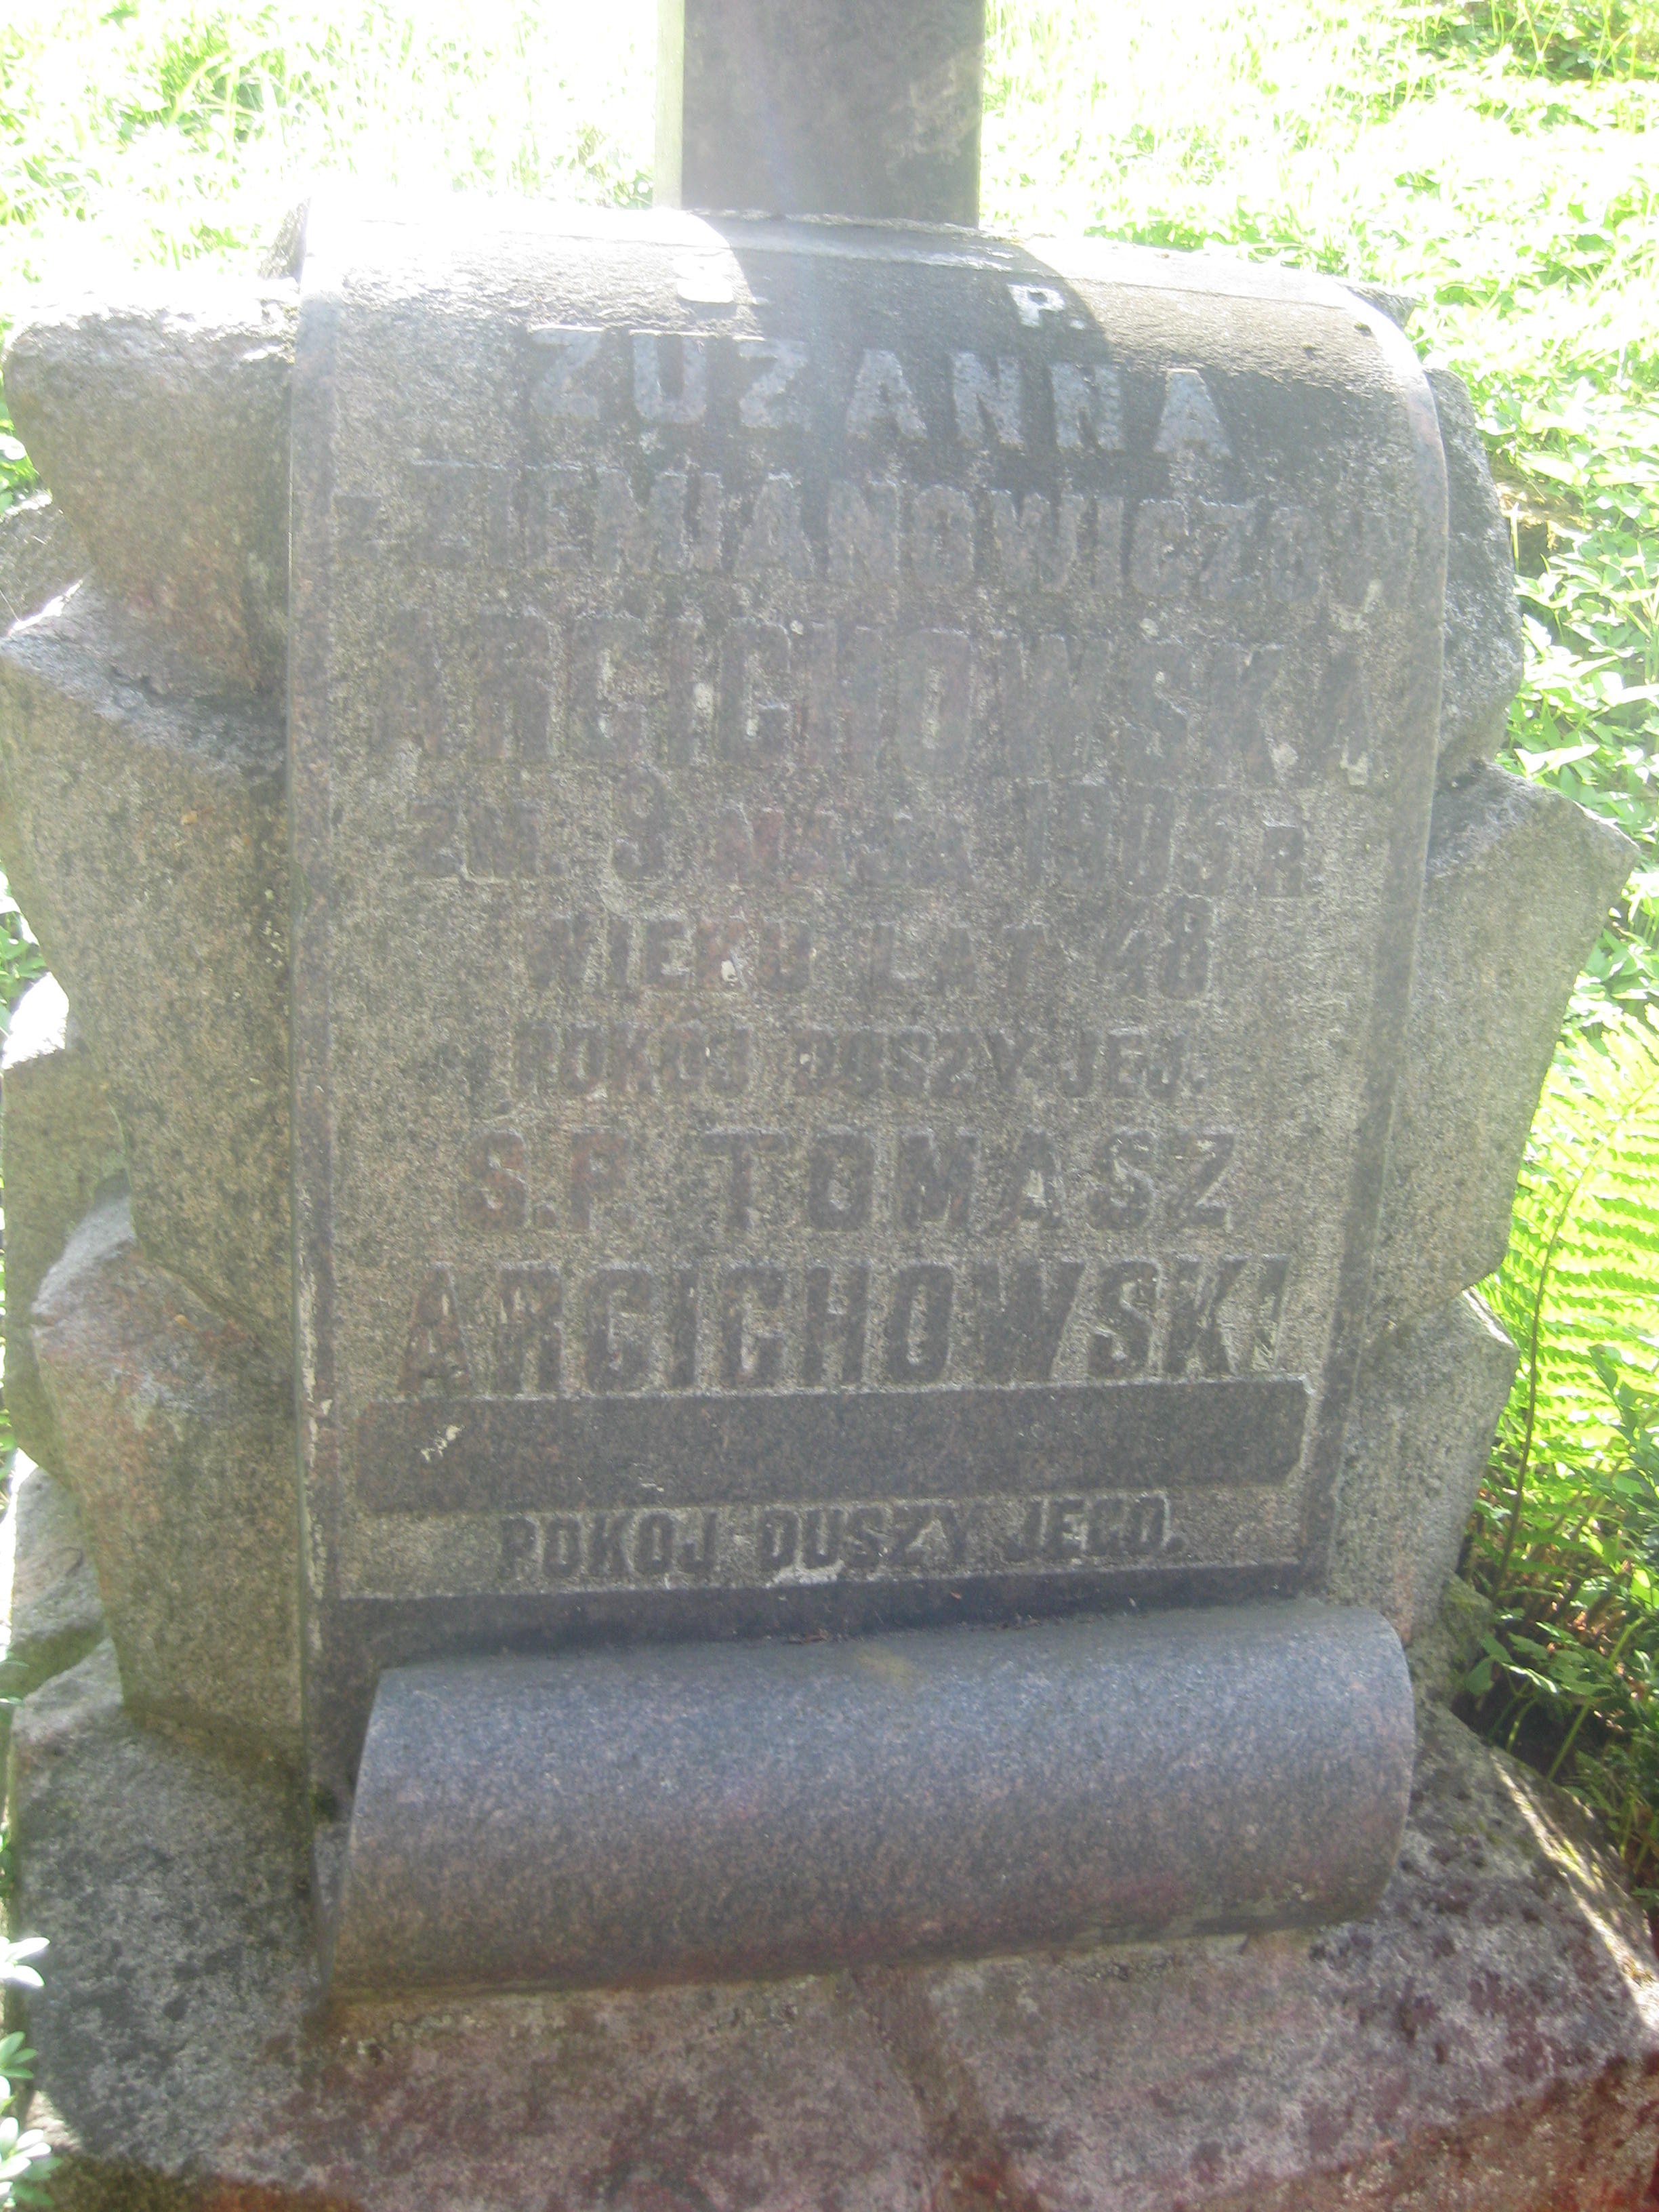 Fragment of the tombstone of Tomasz and Susanna Arcichowski, Na Rossie cemetery in Vilnius, as of 2013.